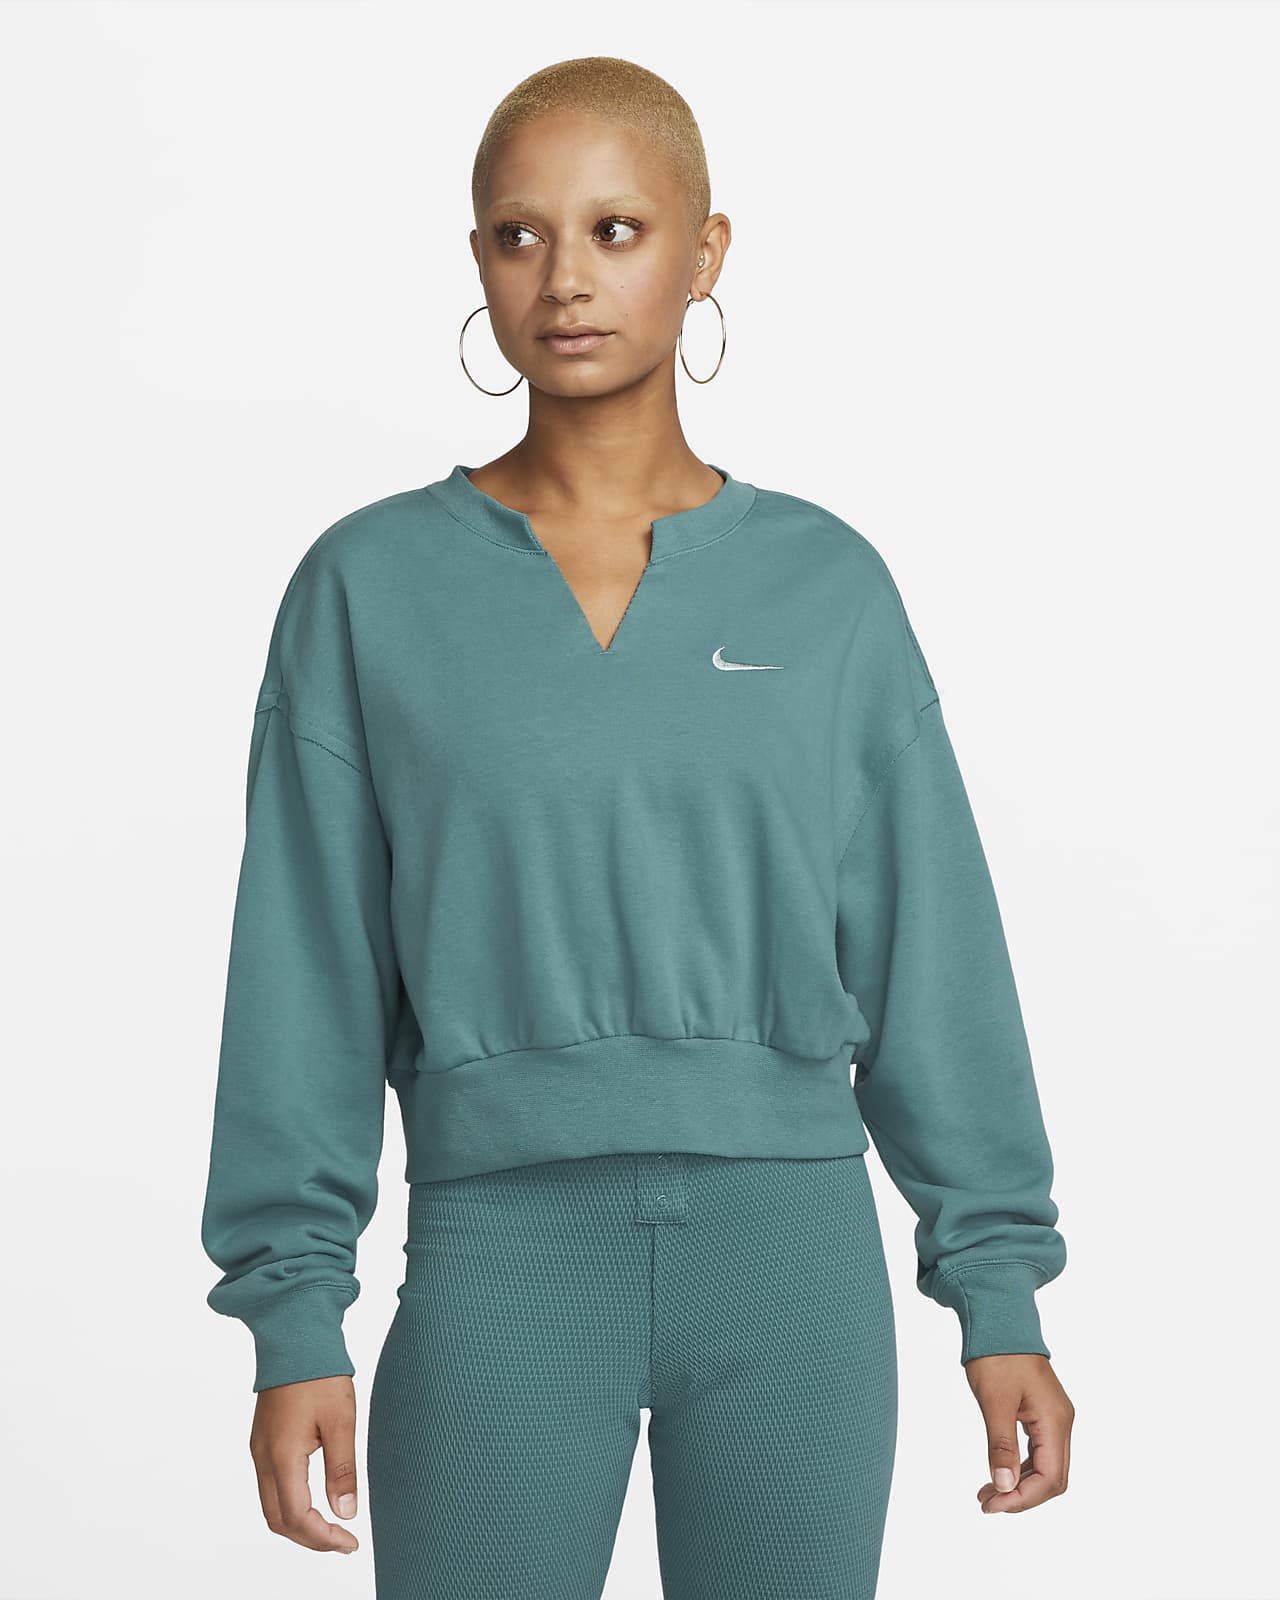 https://static.nike.com/a/images/t_PDP_1280_v1/f_auto,q_auto:eco/3a75a7fd-d2b3-445c-b976-24c4b4cf1ba9/sportswear-everyday-modern-oversized-crop-french-terry-crew-neck-sweatshirt-qV9m3J.png